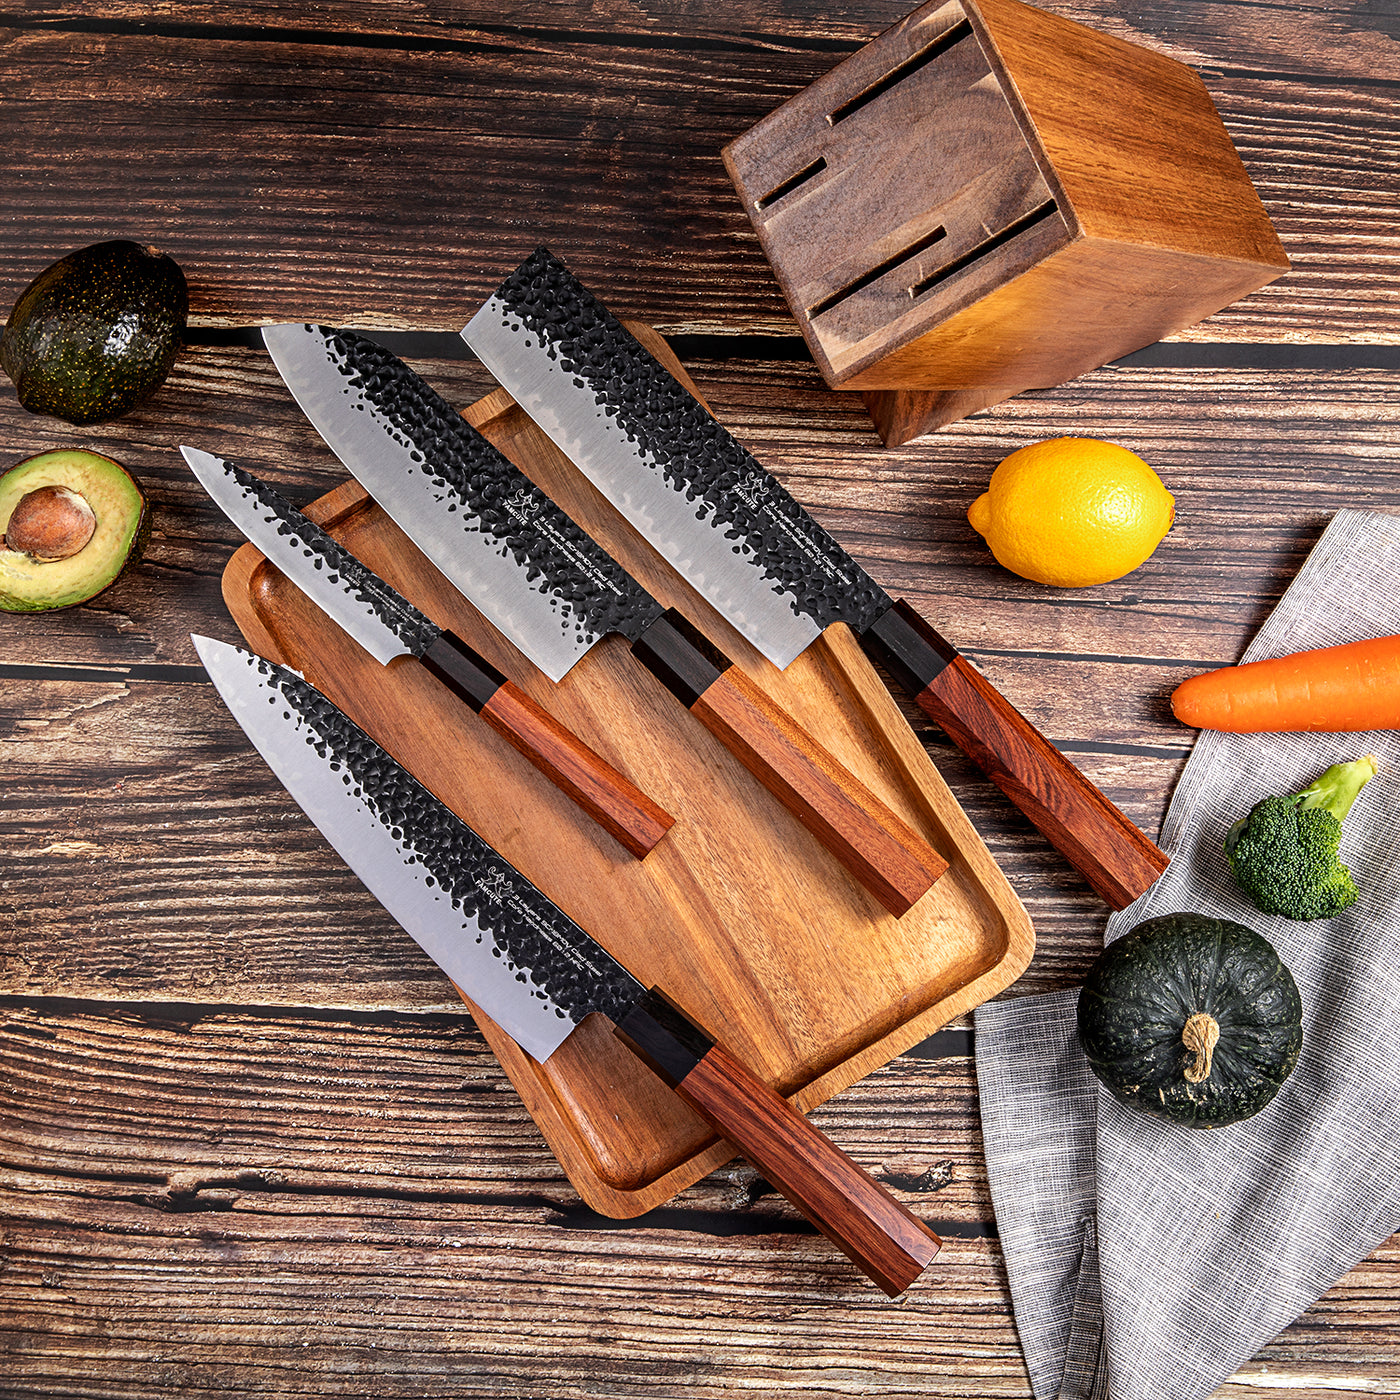  FULLHI 12pcs Japanese Gyuto Chef Knife set Professional Hand  Forged Kitchen Chef Knife, 3 Layers 9CR18MOV High Carbon Meat Sushi Knife  Rosewood Handle with knife bag: Home & Kitchen